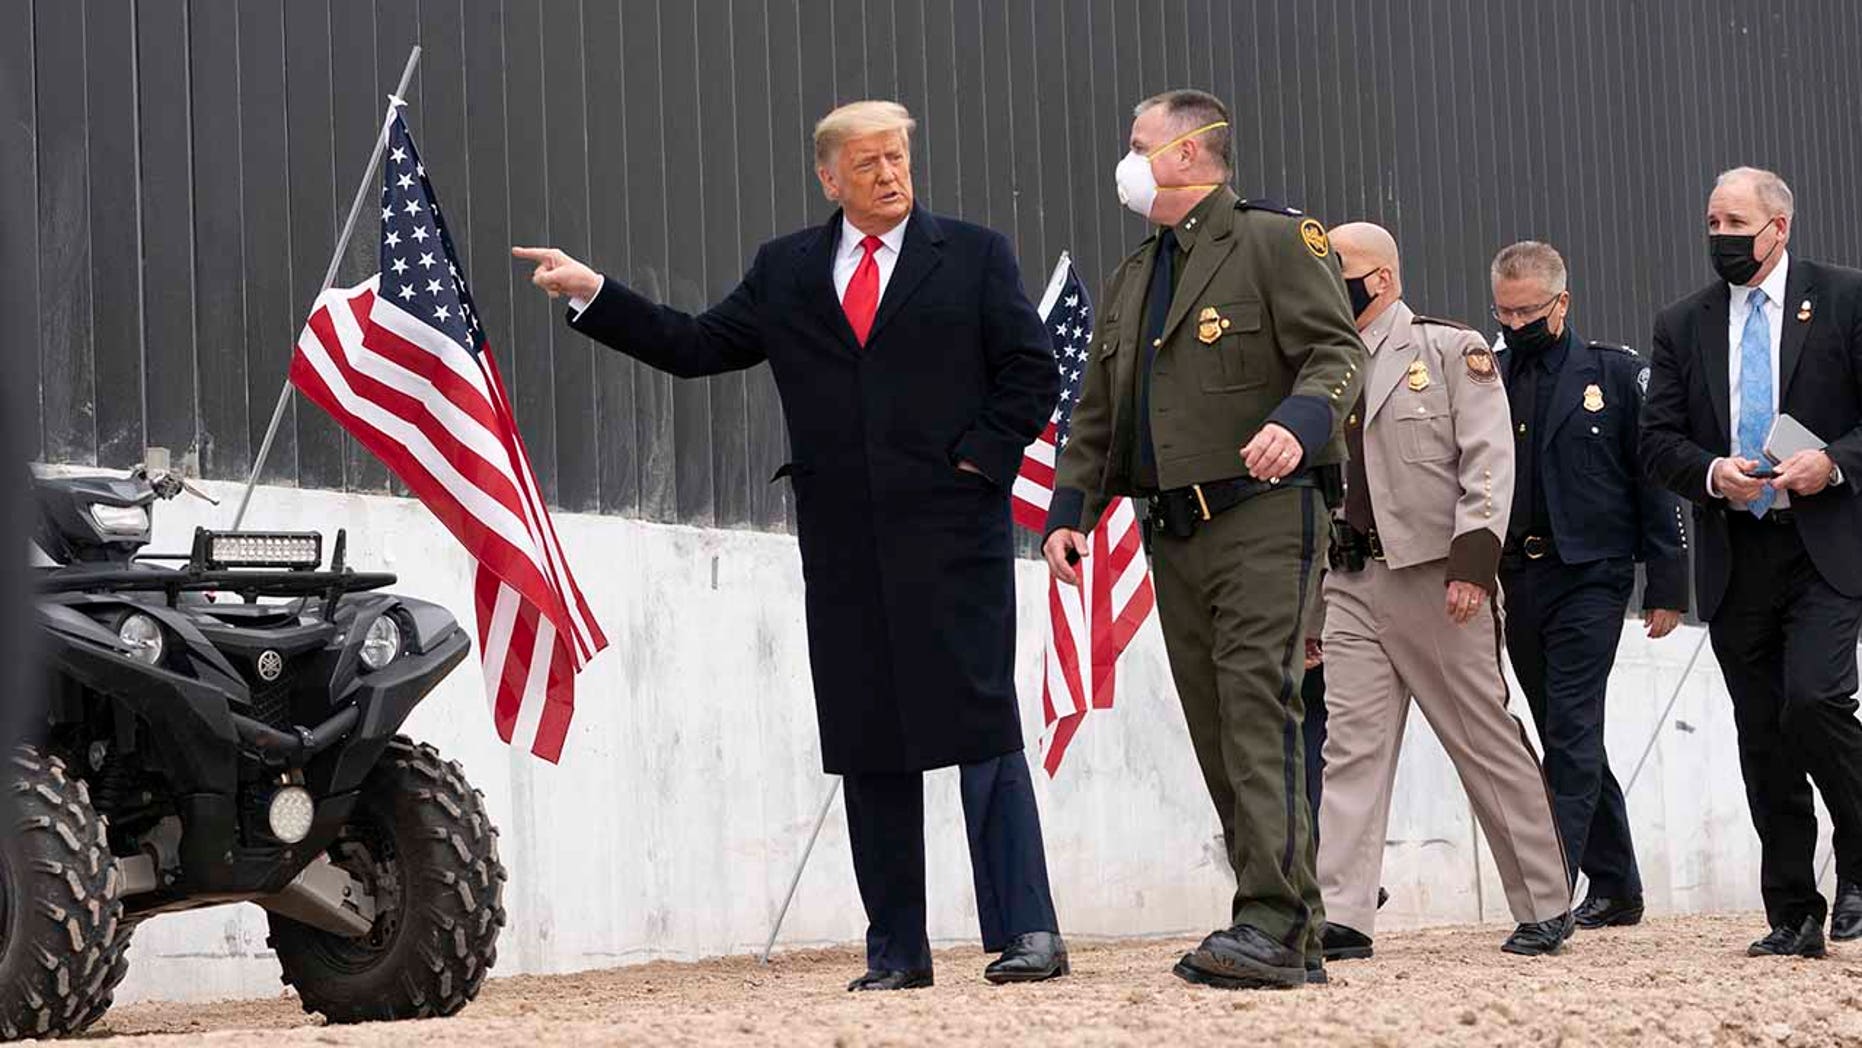 Trump is touring a section of the U.S.-Mexico border